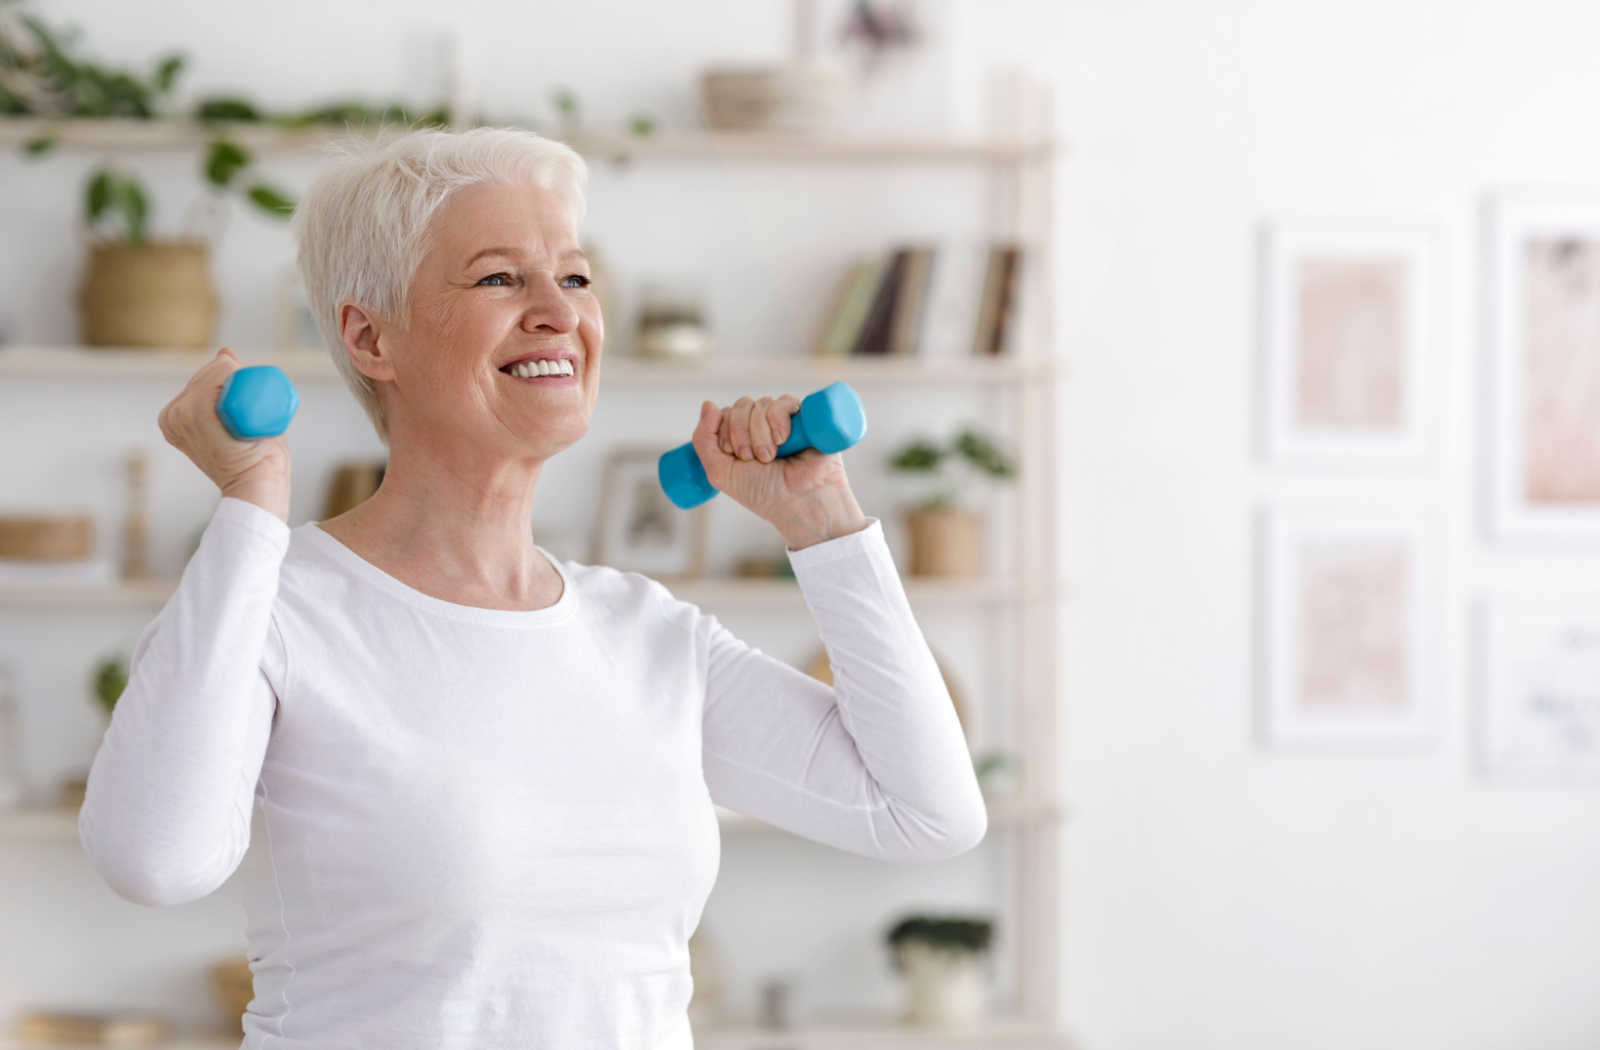 A smiling senior wearing fitness clothes and exercising with dumbbells.